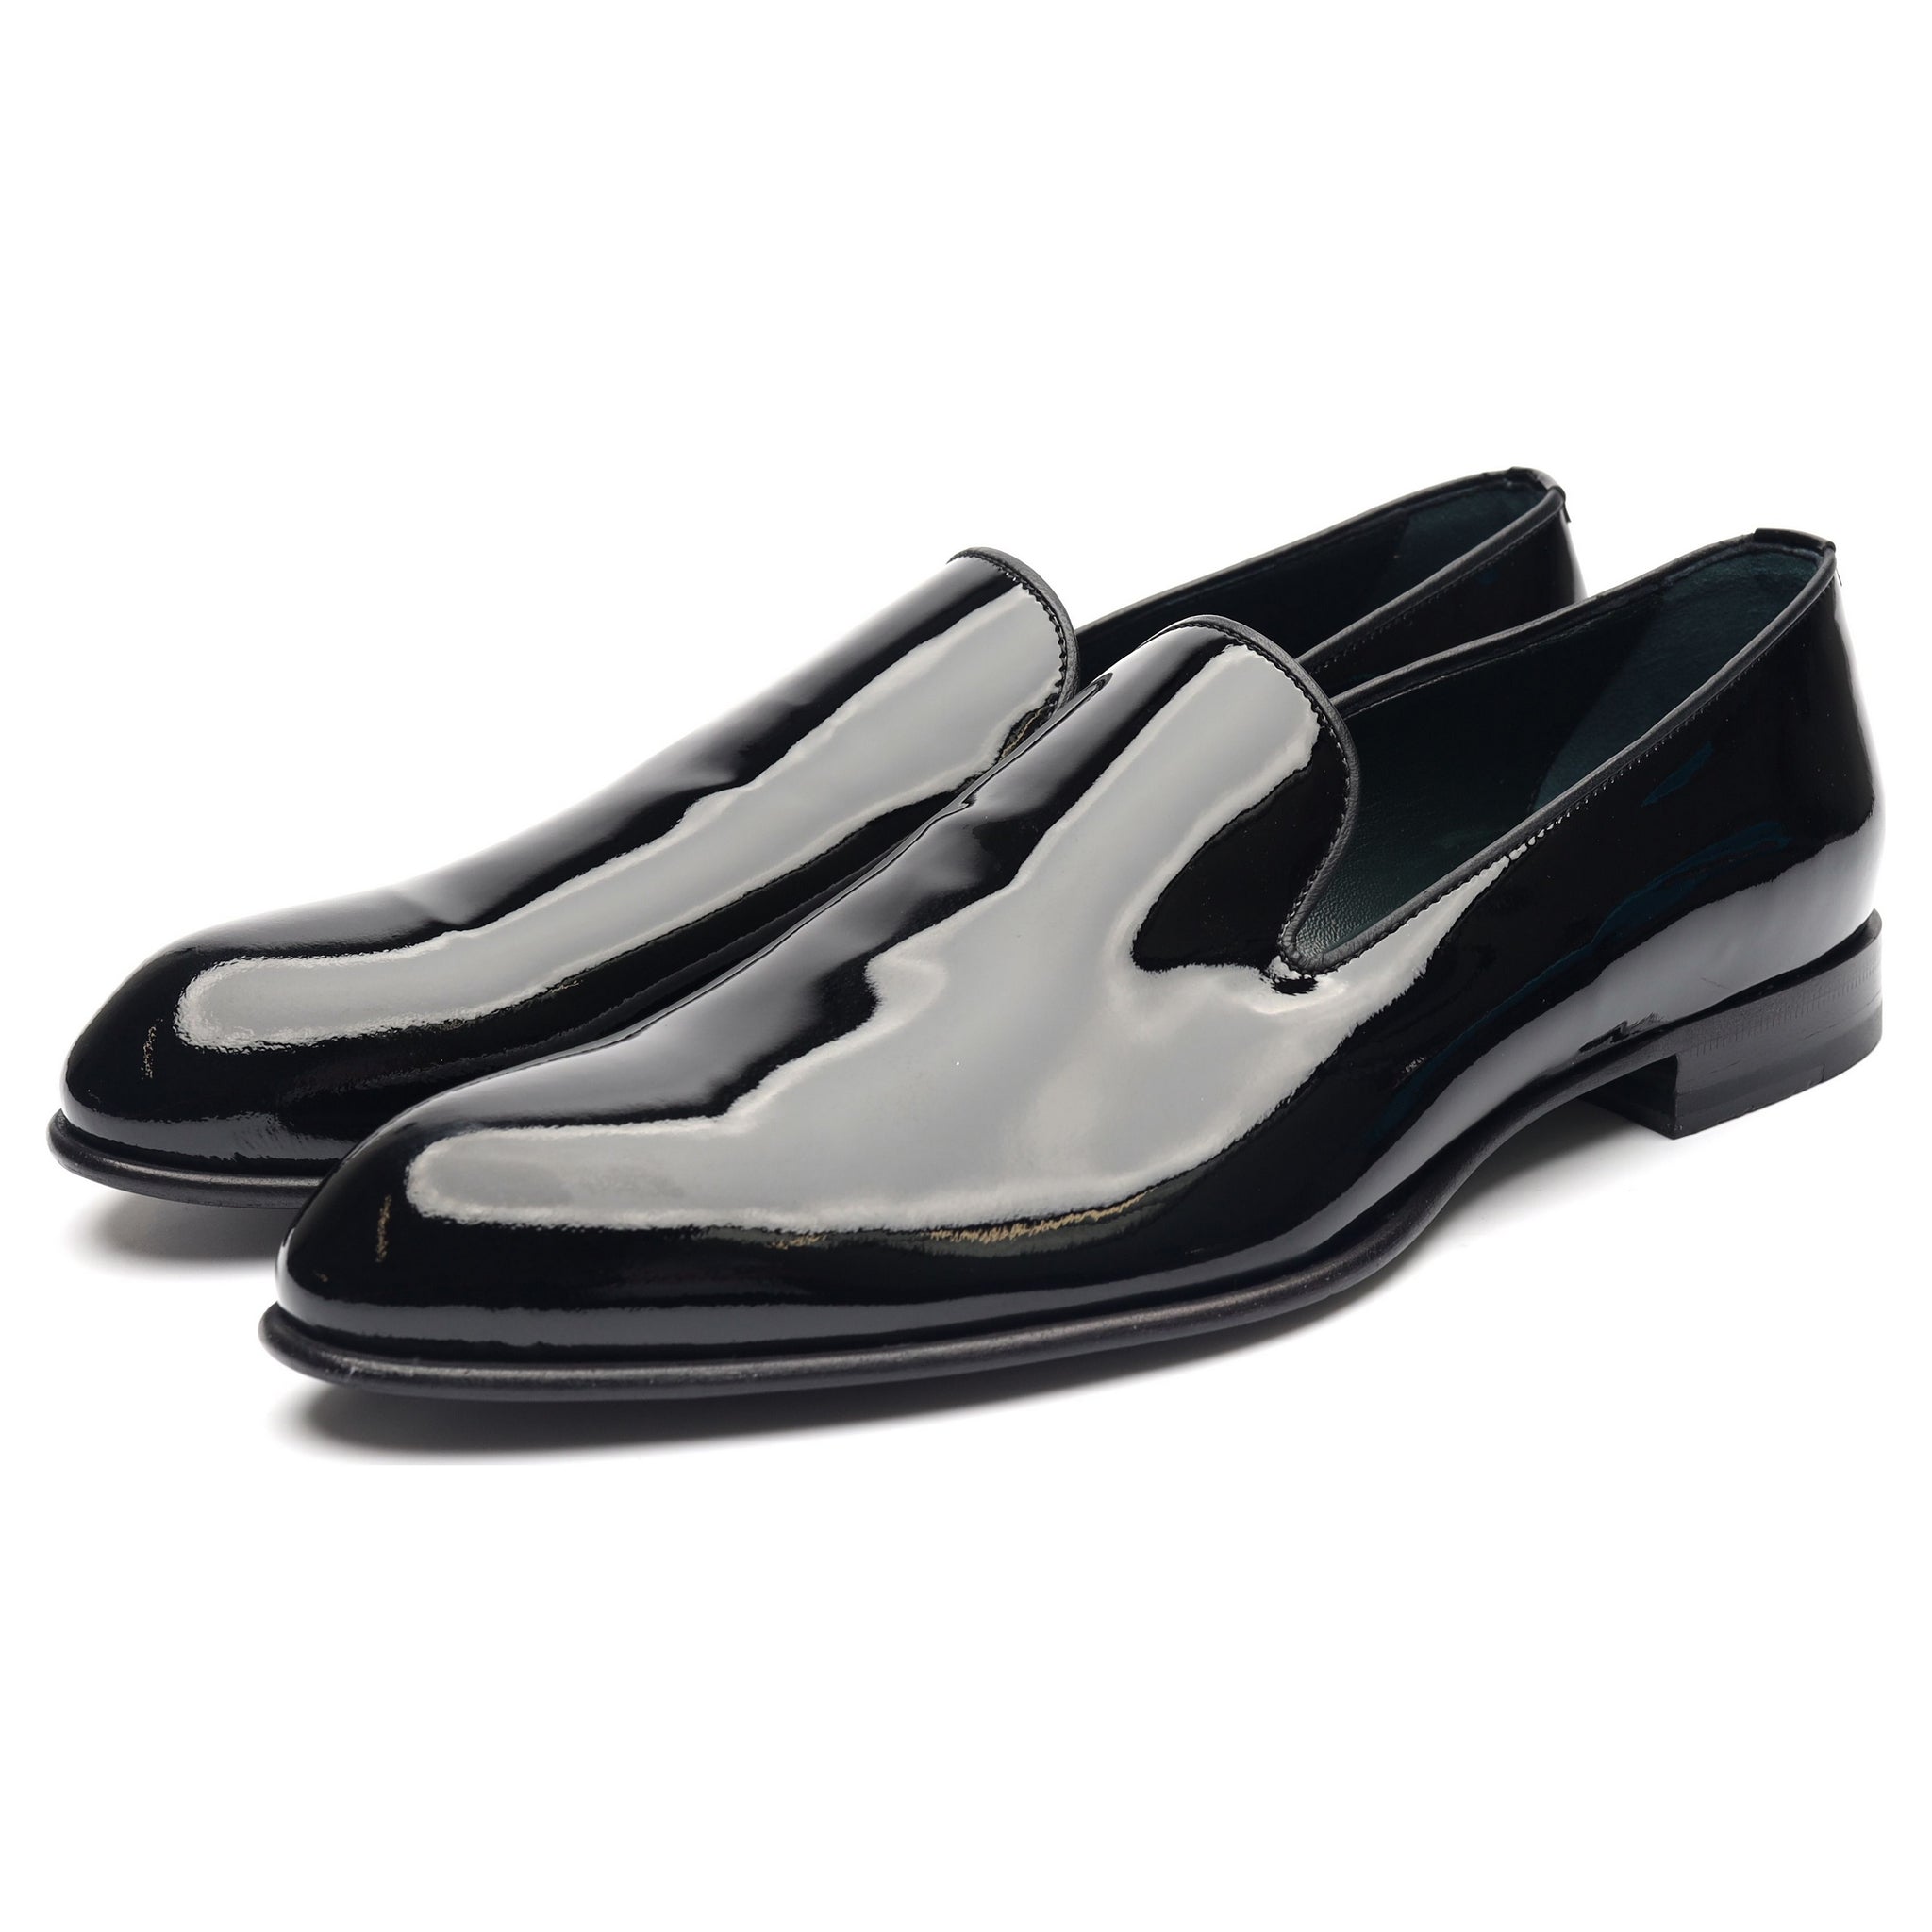 Patent Leather Evening Loafers UK 8 - Abbot's